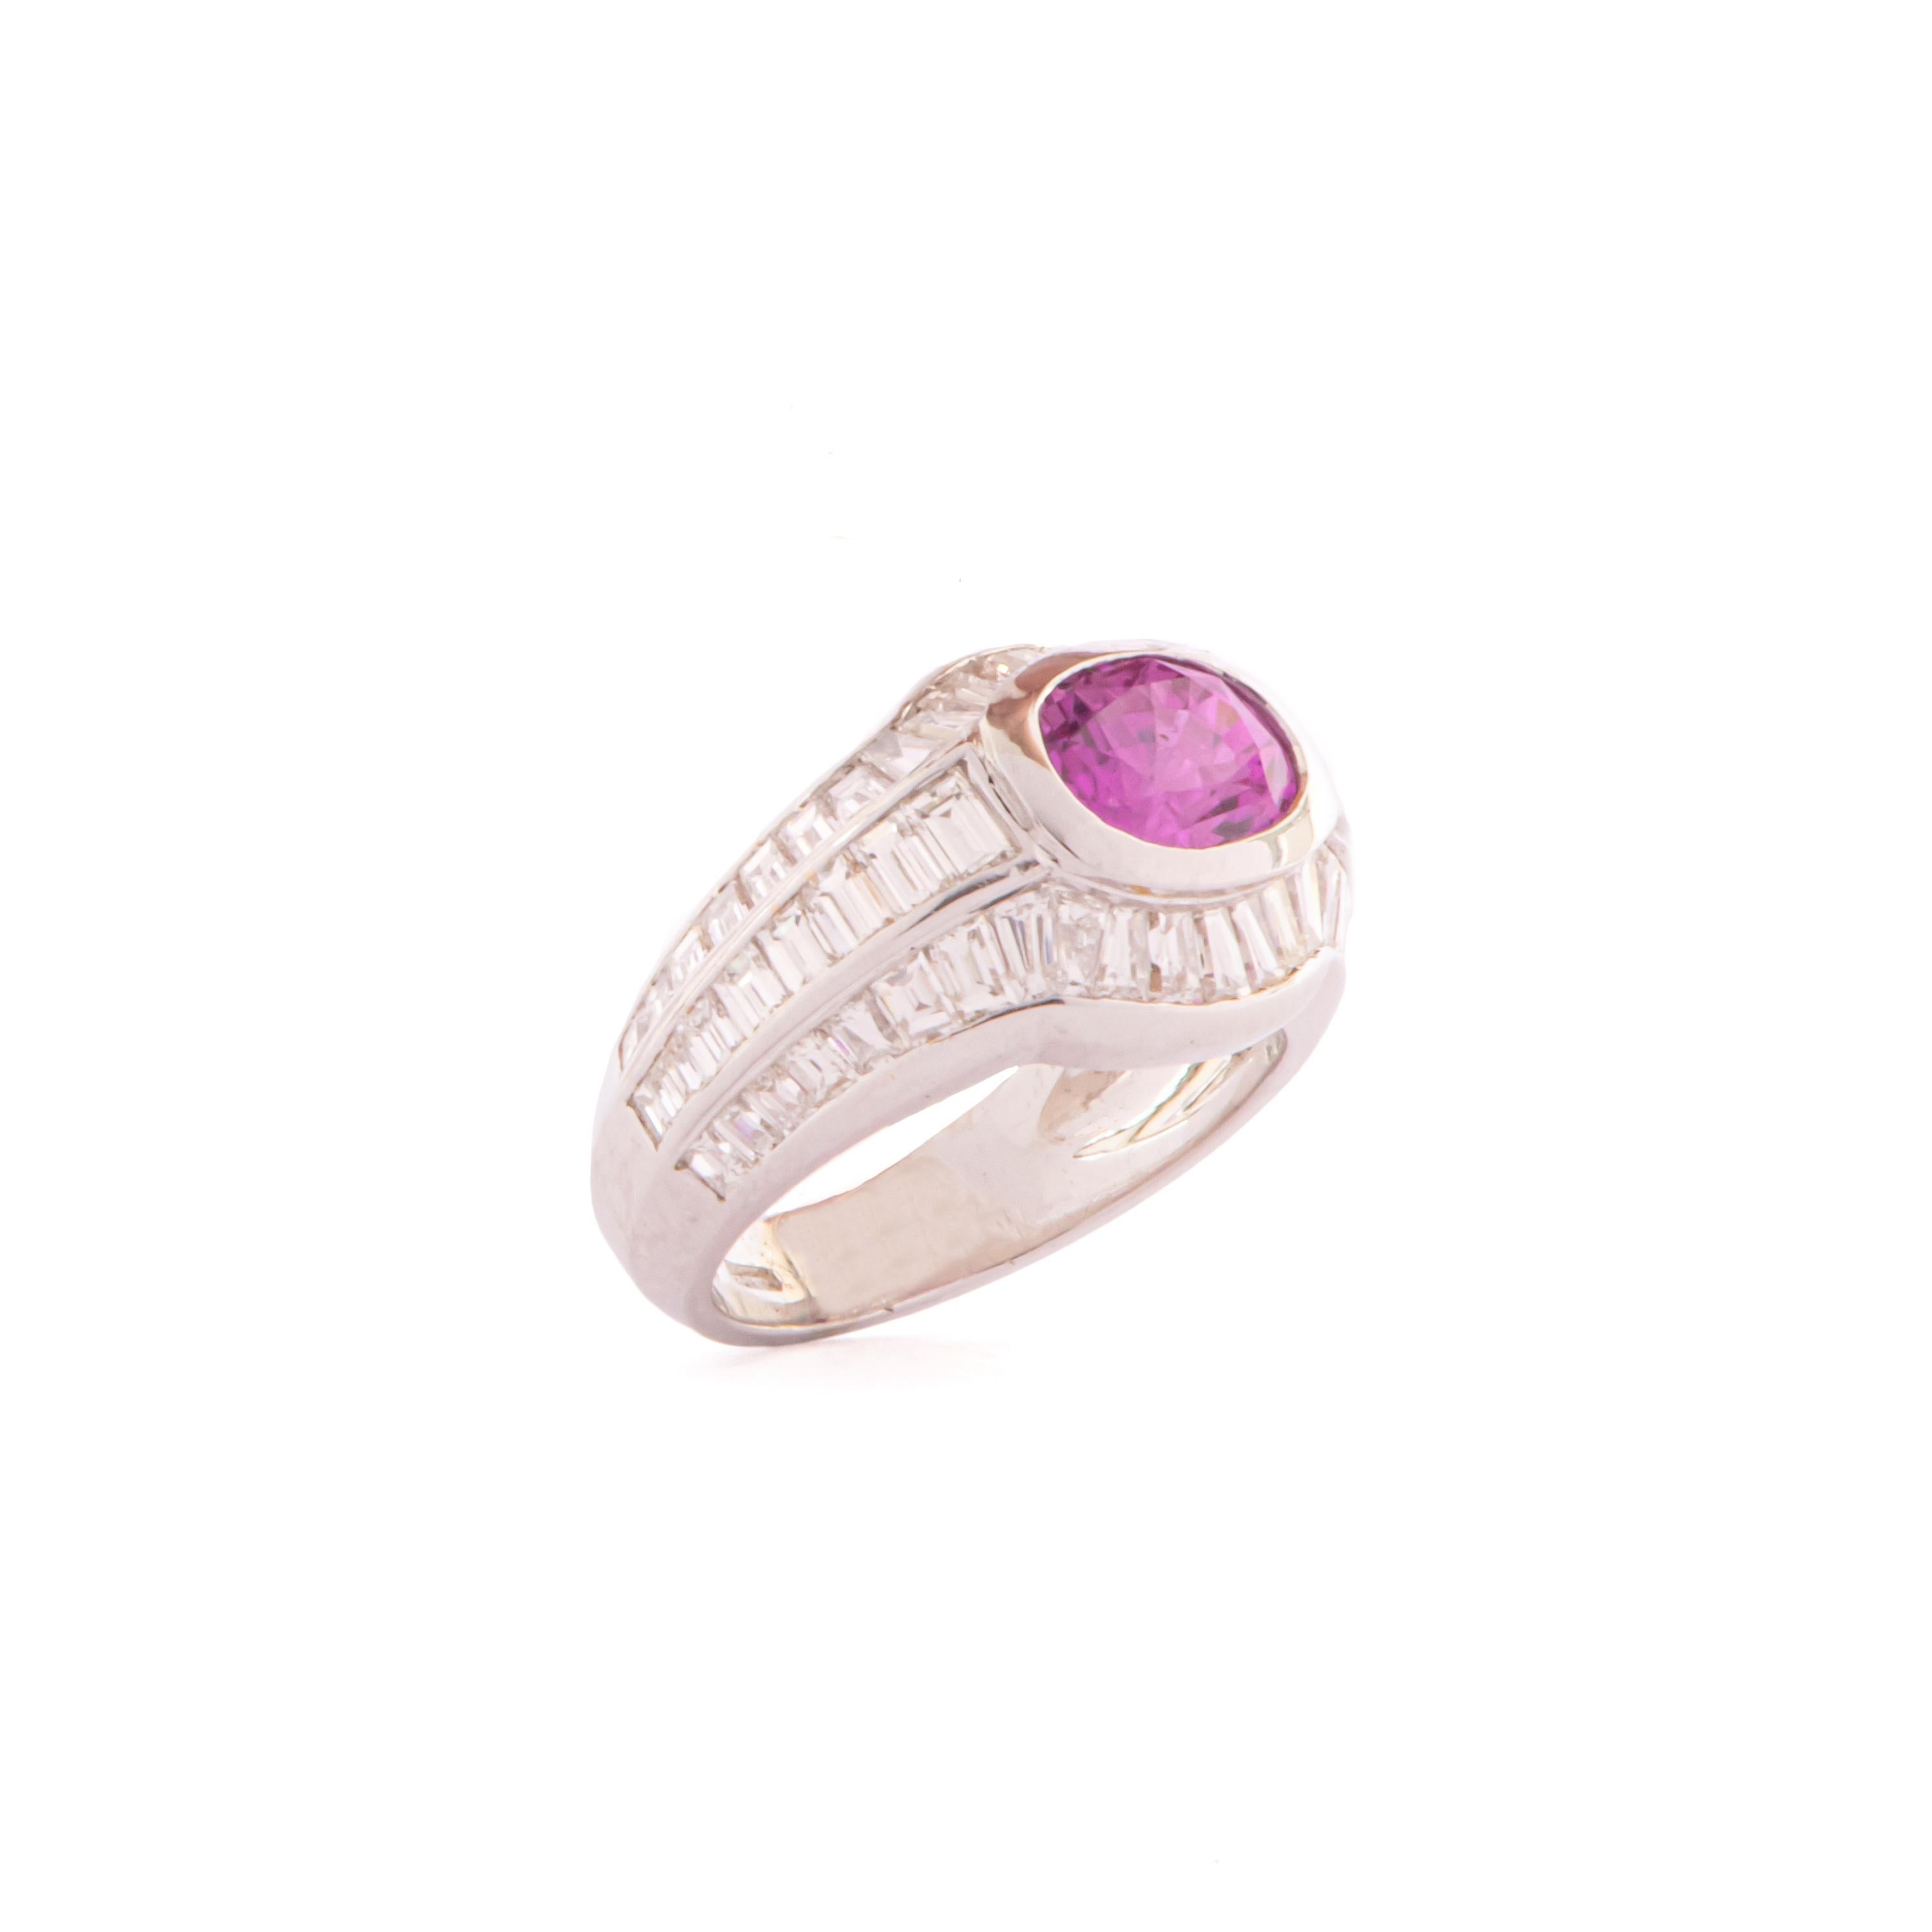 A cocktail ring featuring an oval cut pink sapphires weighing 2.30carats and diamond baguettes cut ct 3,47.
Perfect fo  a dressy night!
Size 10 Italian